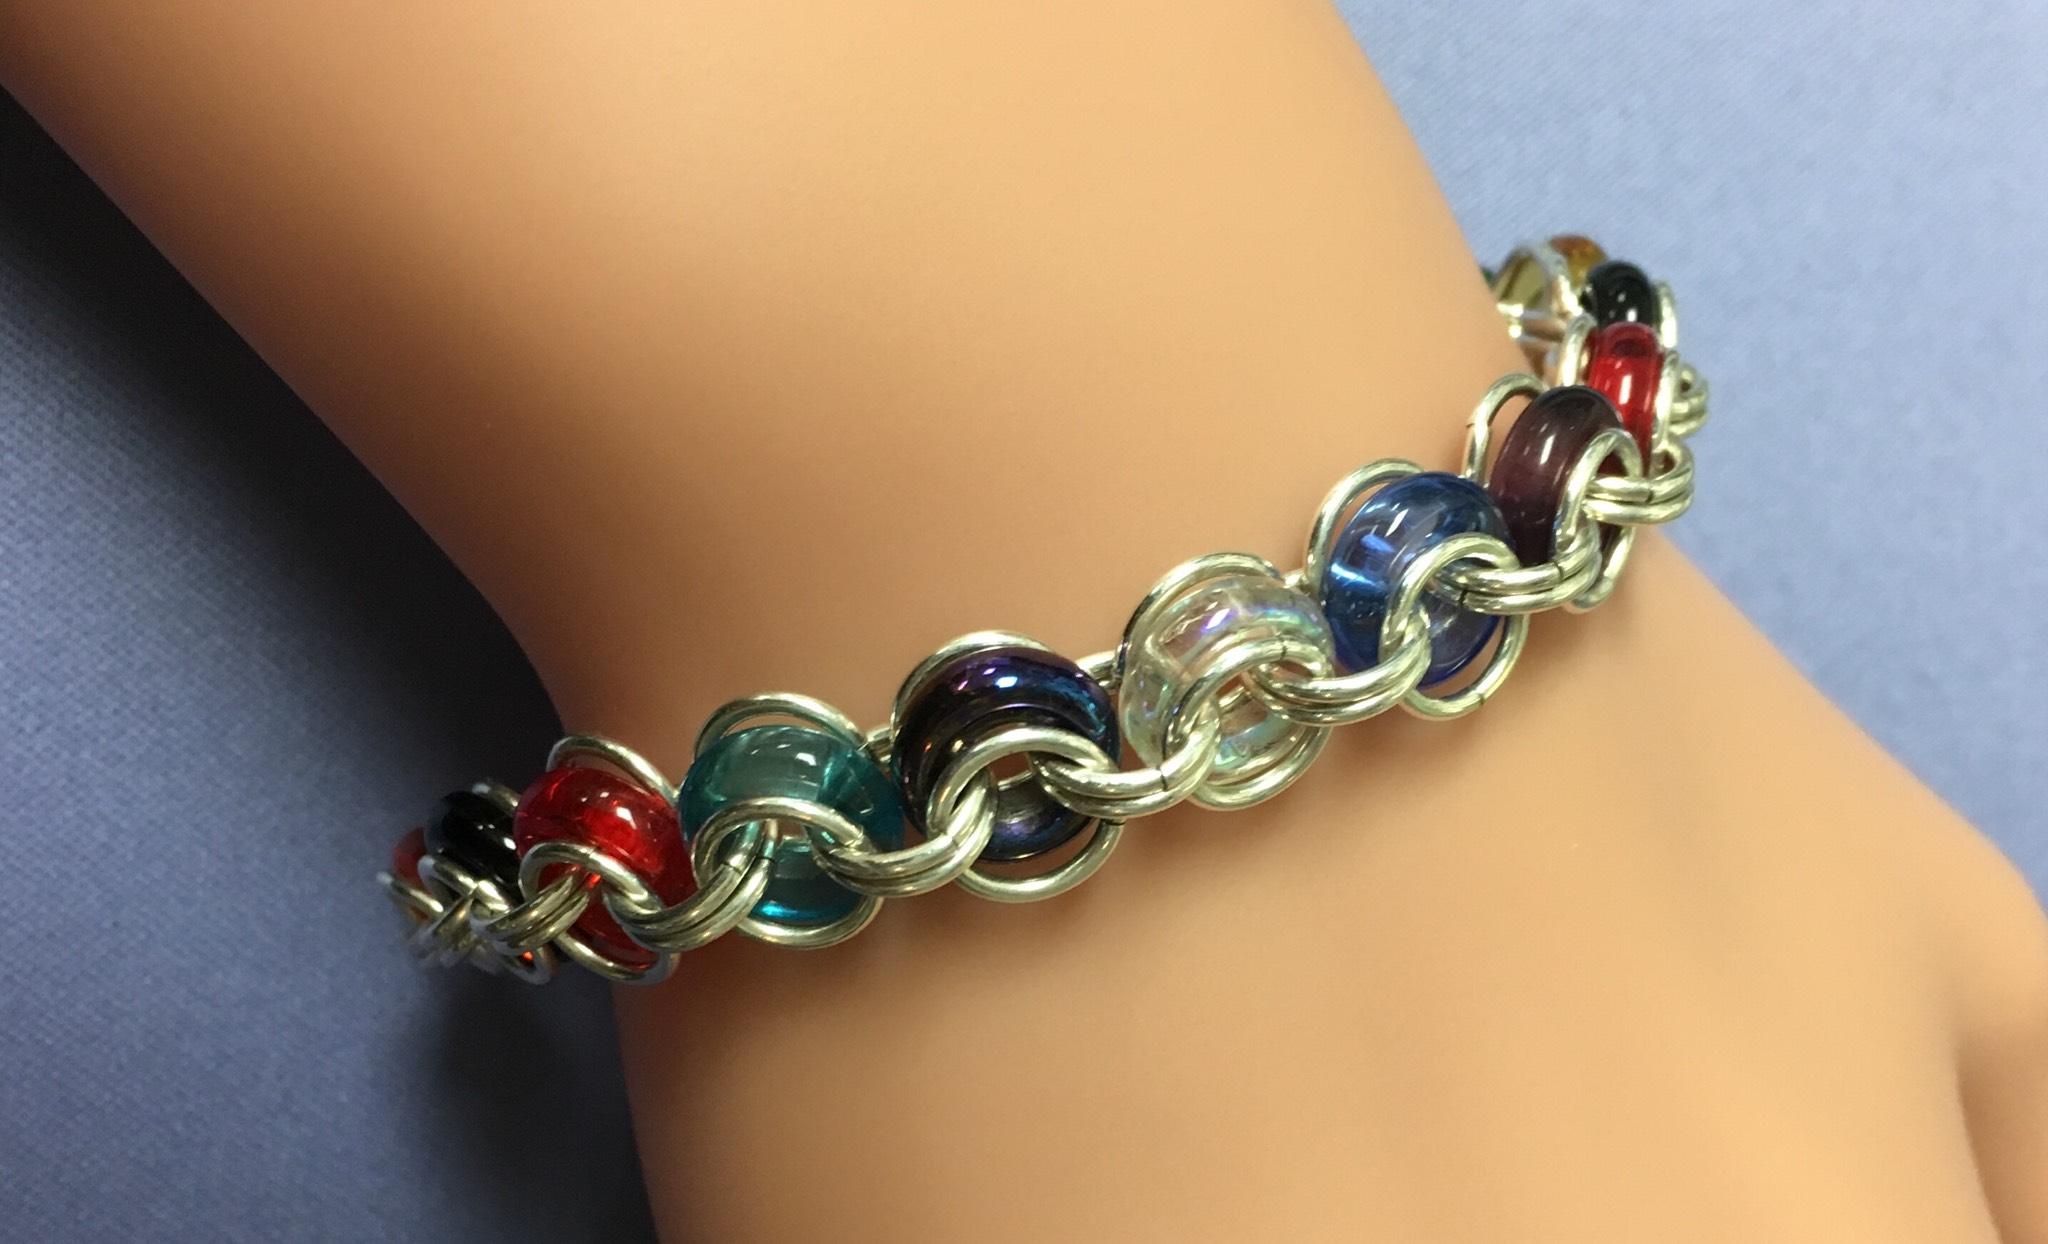 "Bicycle Chain" Chain Maille Bracelet